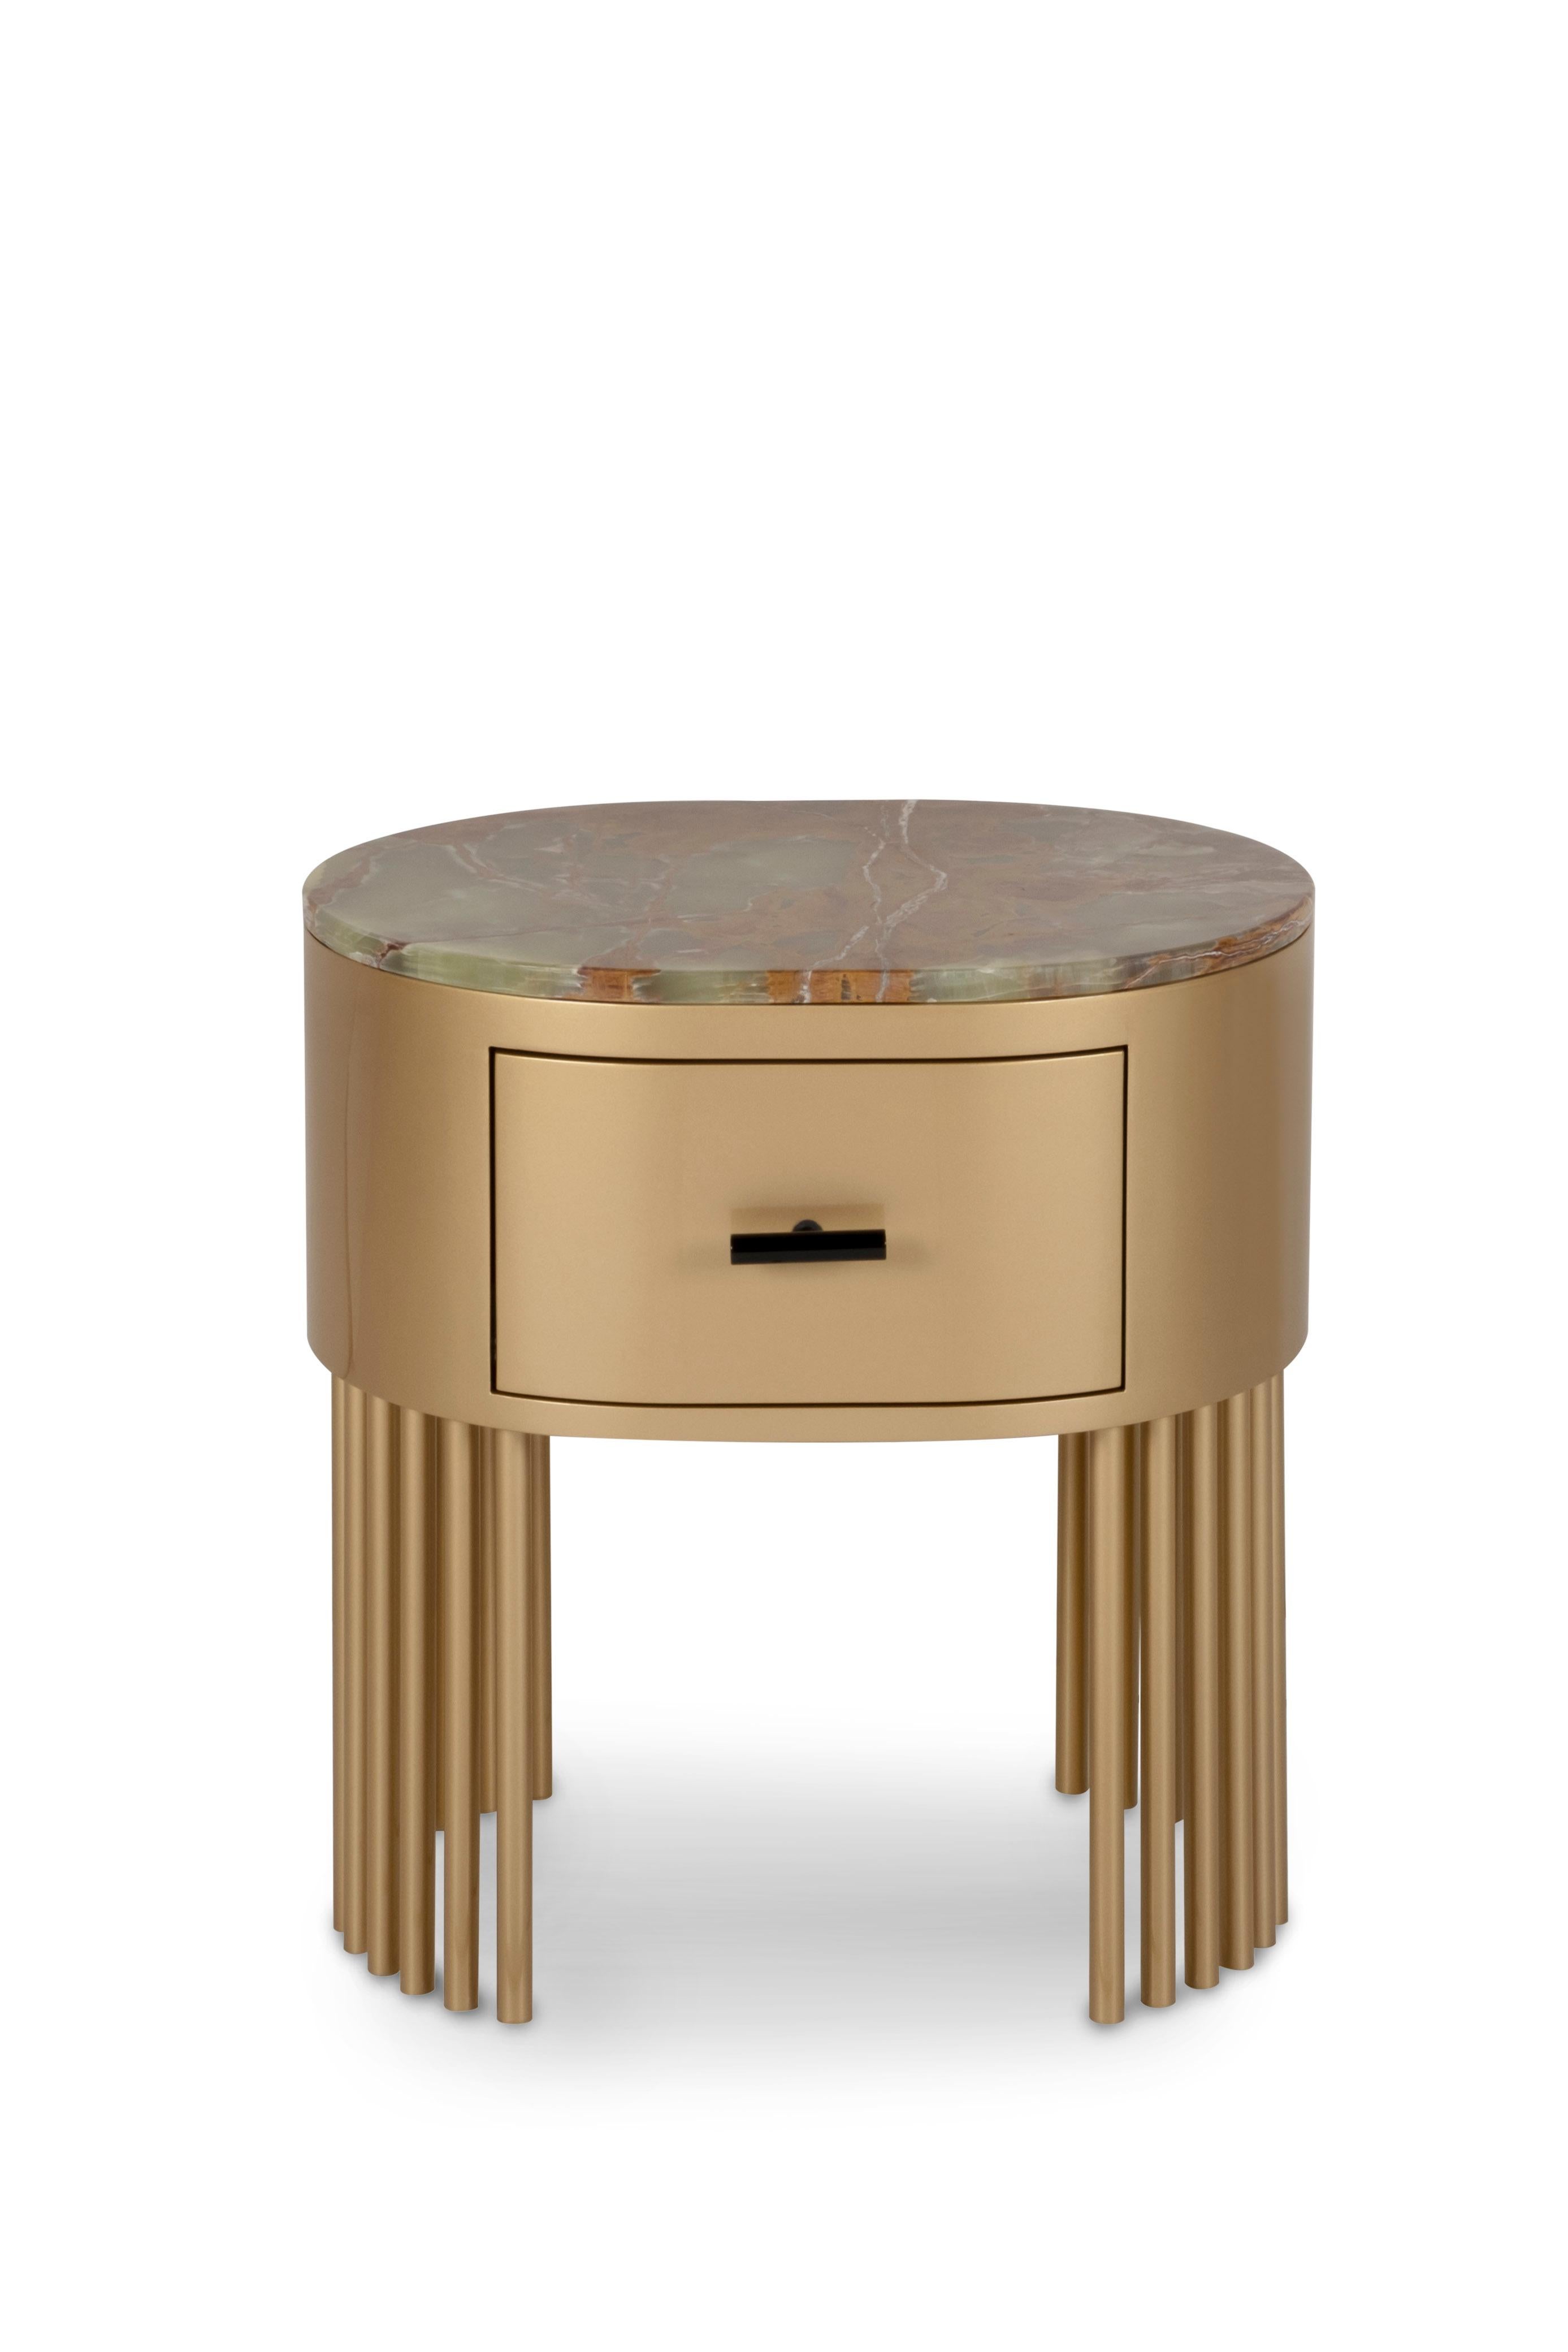 Mons Bedside Table, Contemporary Collection, Handcrafted in Portugal - Europe by Greenapple.

The Mons bedside table offers a timeless design for your living area. Mons is a wooden bedside table lacquered in gold patina effect and finished with a